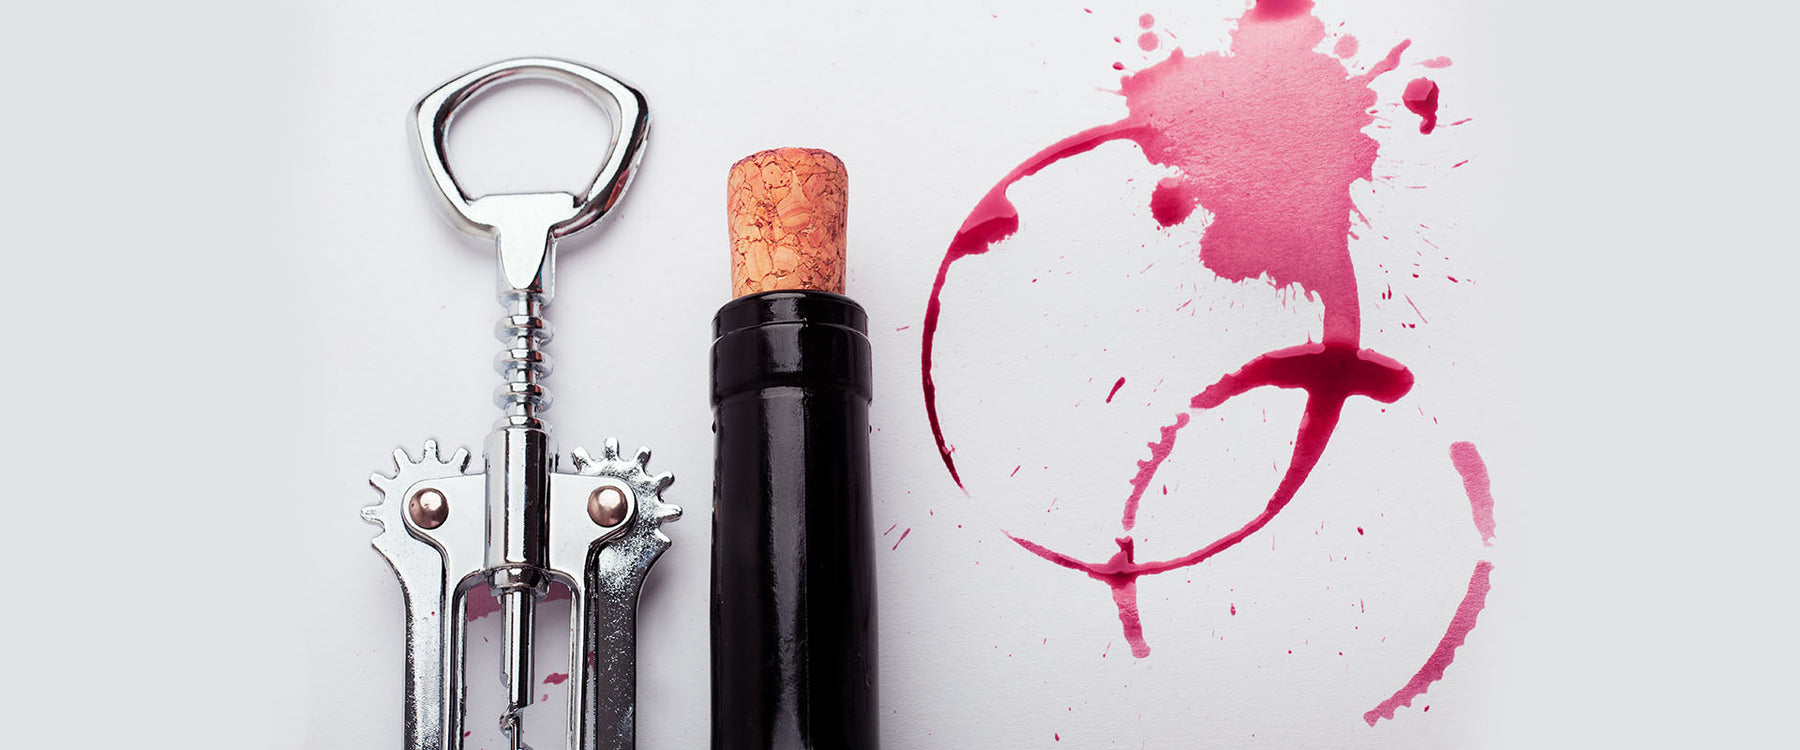 How to Clean Your Wine Bottle Opener Using Household Products